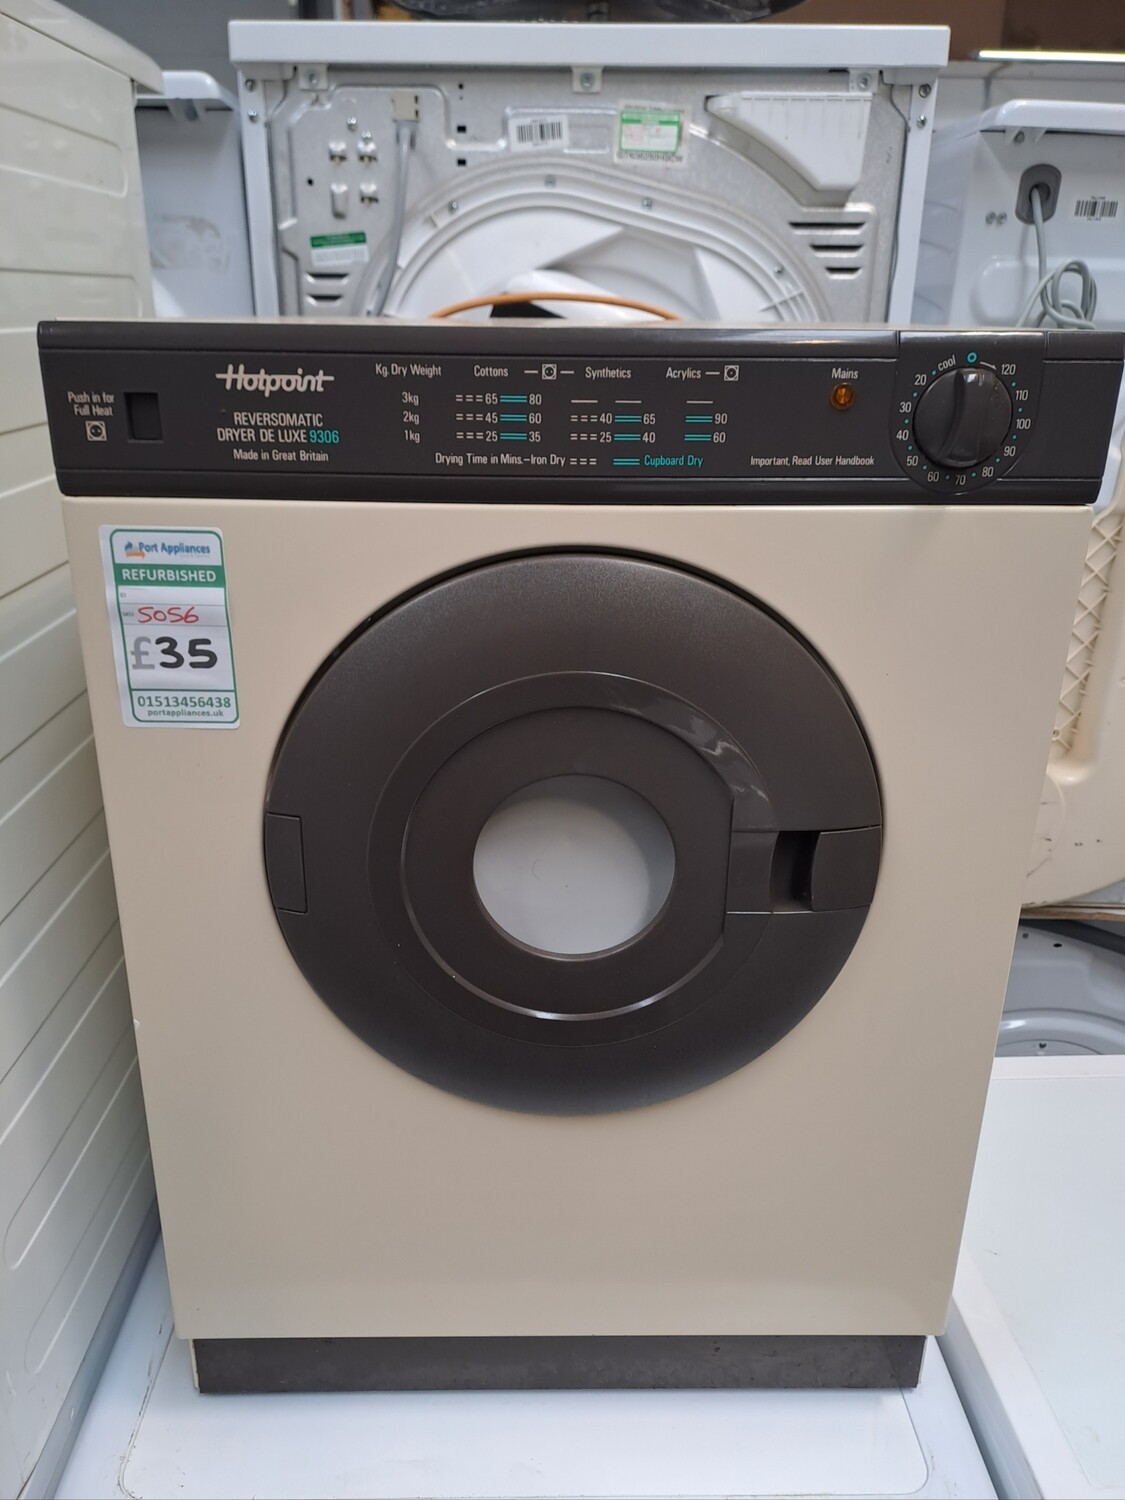 Hotpoint 9306 3KG Compact Tumble Dryer Cream Refurbished H67cm
W49cm
D48cm 3 Months Guarantee. This item is located in our Whitby Road Shop 